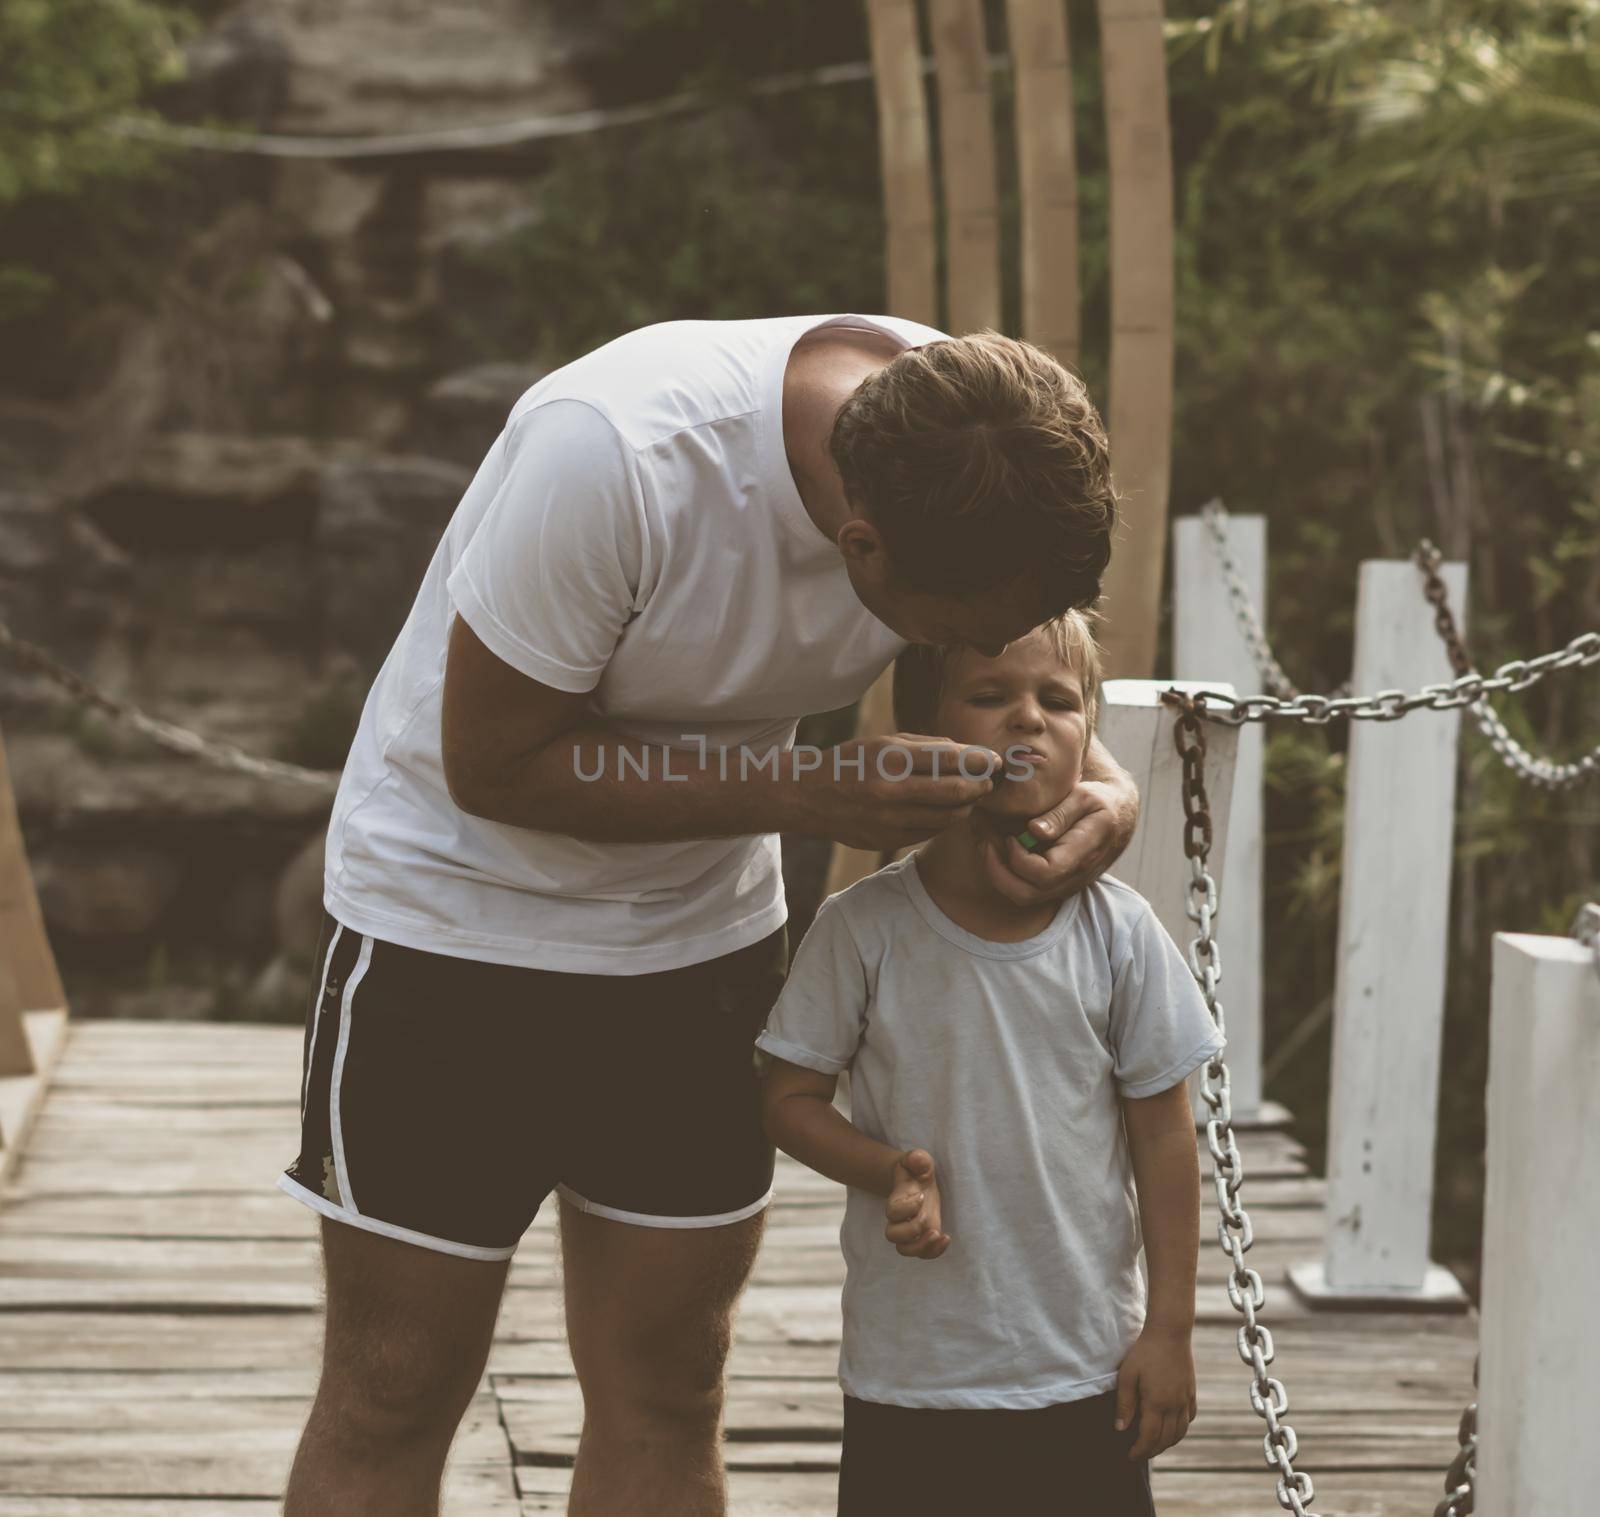 Vintage matte effect photo lifestyle walk moment. Man care treat kid face sore, gesture hand look on boy. Father hug hold child son closely arm embrace, fatherhood love. Family time kindness.